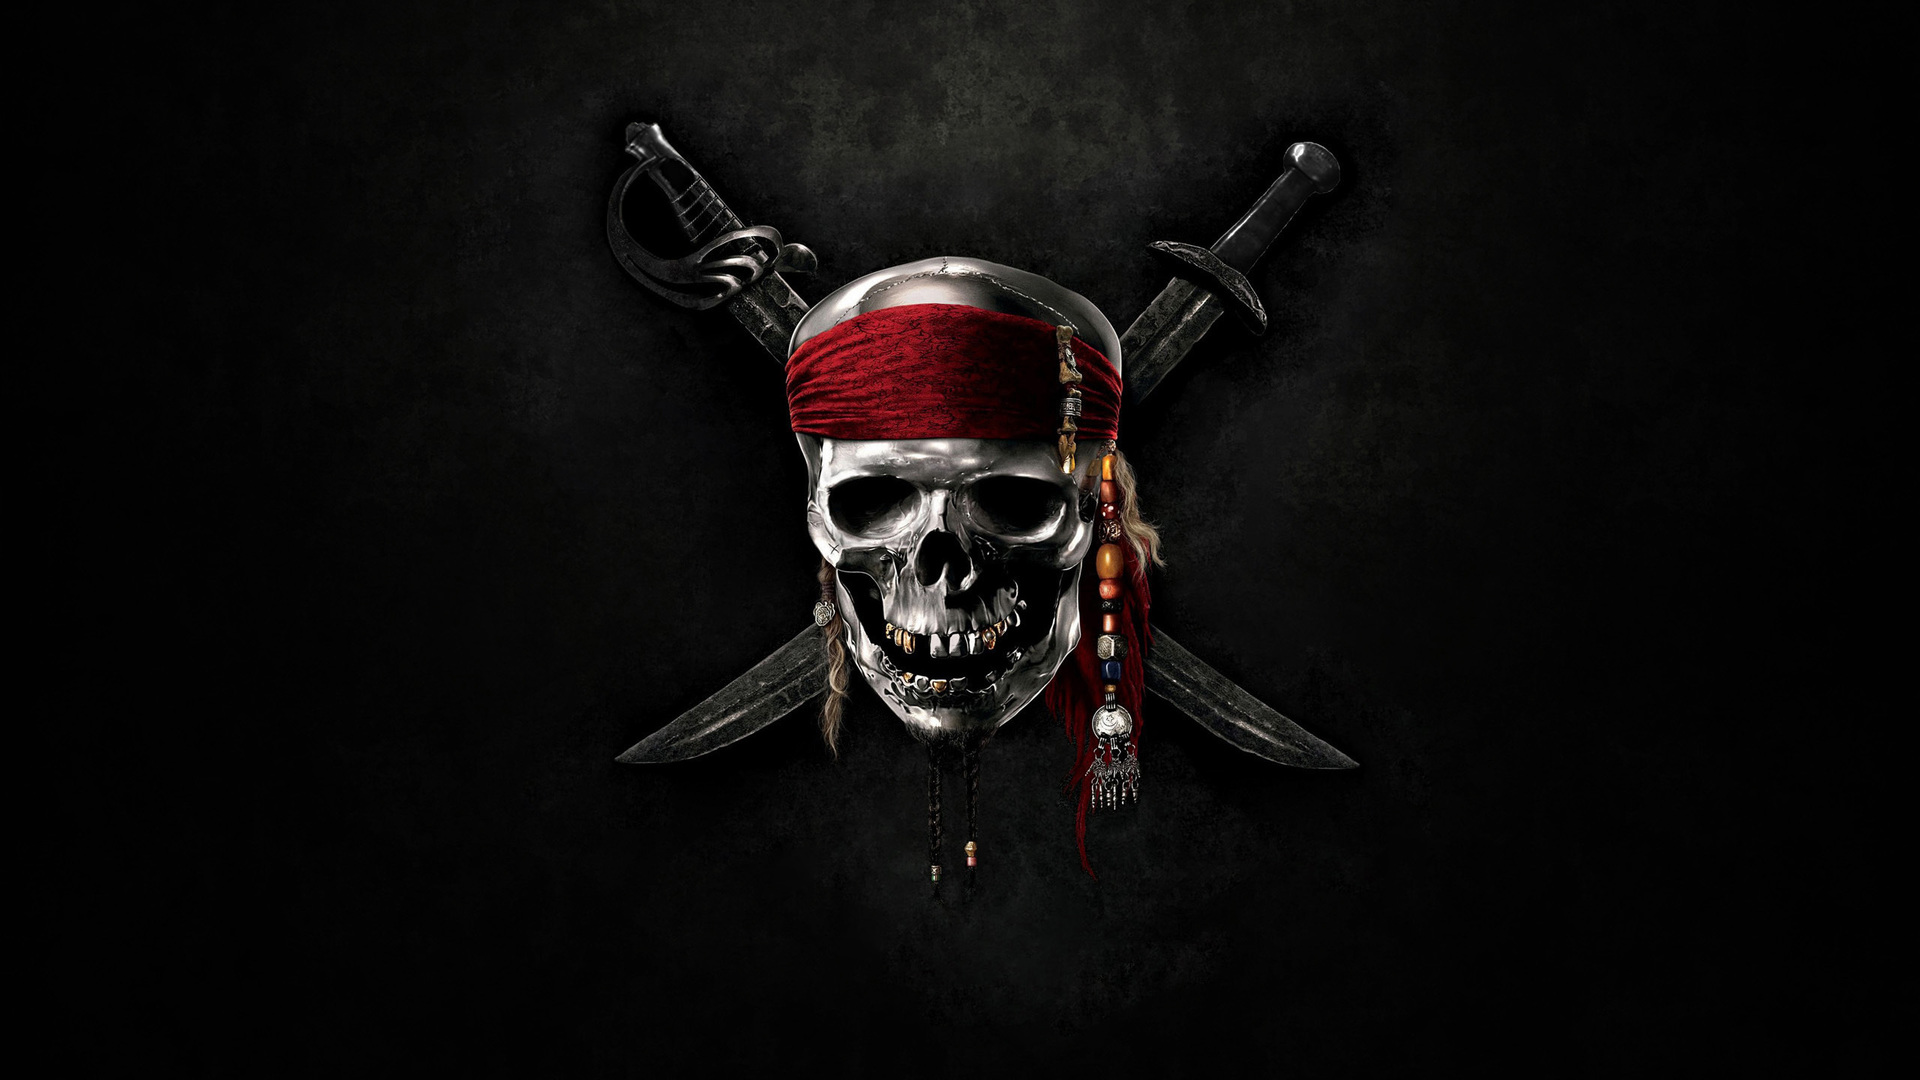 Mobile wallpaper pirates of the caribbean, pirates of the caribbean: on stranger tides, movie